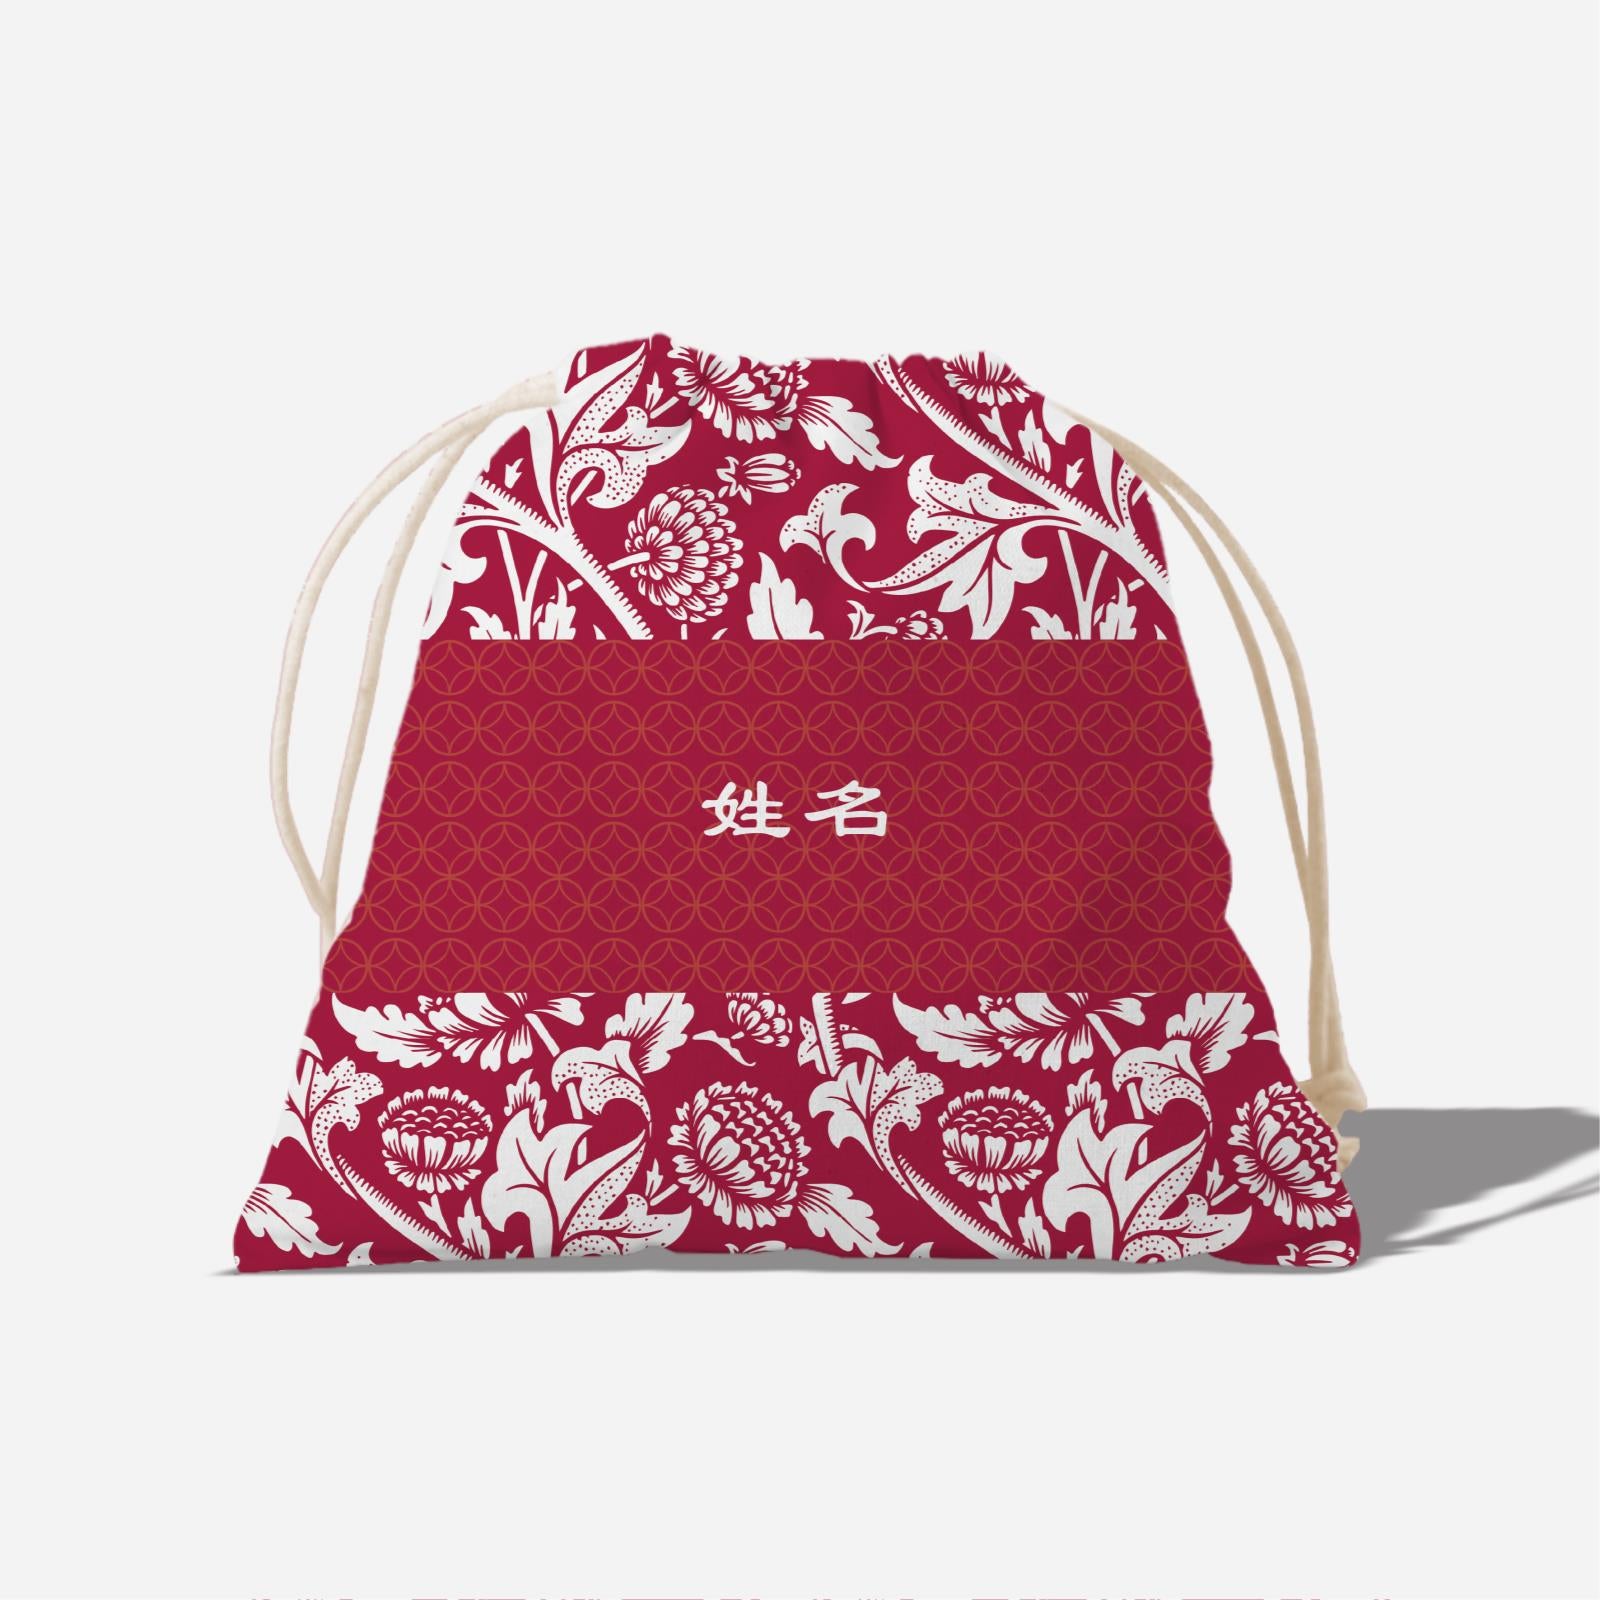 Limitless Opportunity Series - Red Full Print Satchel With Chinese Personalization